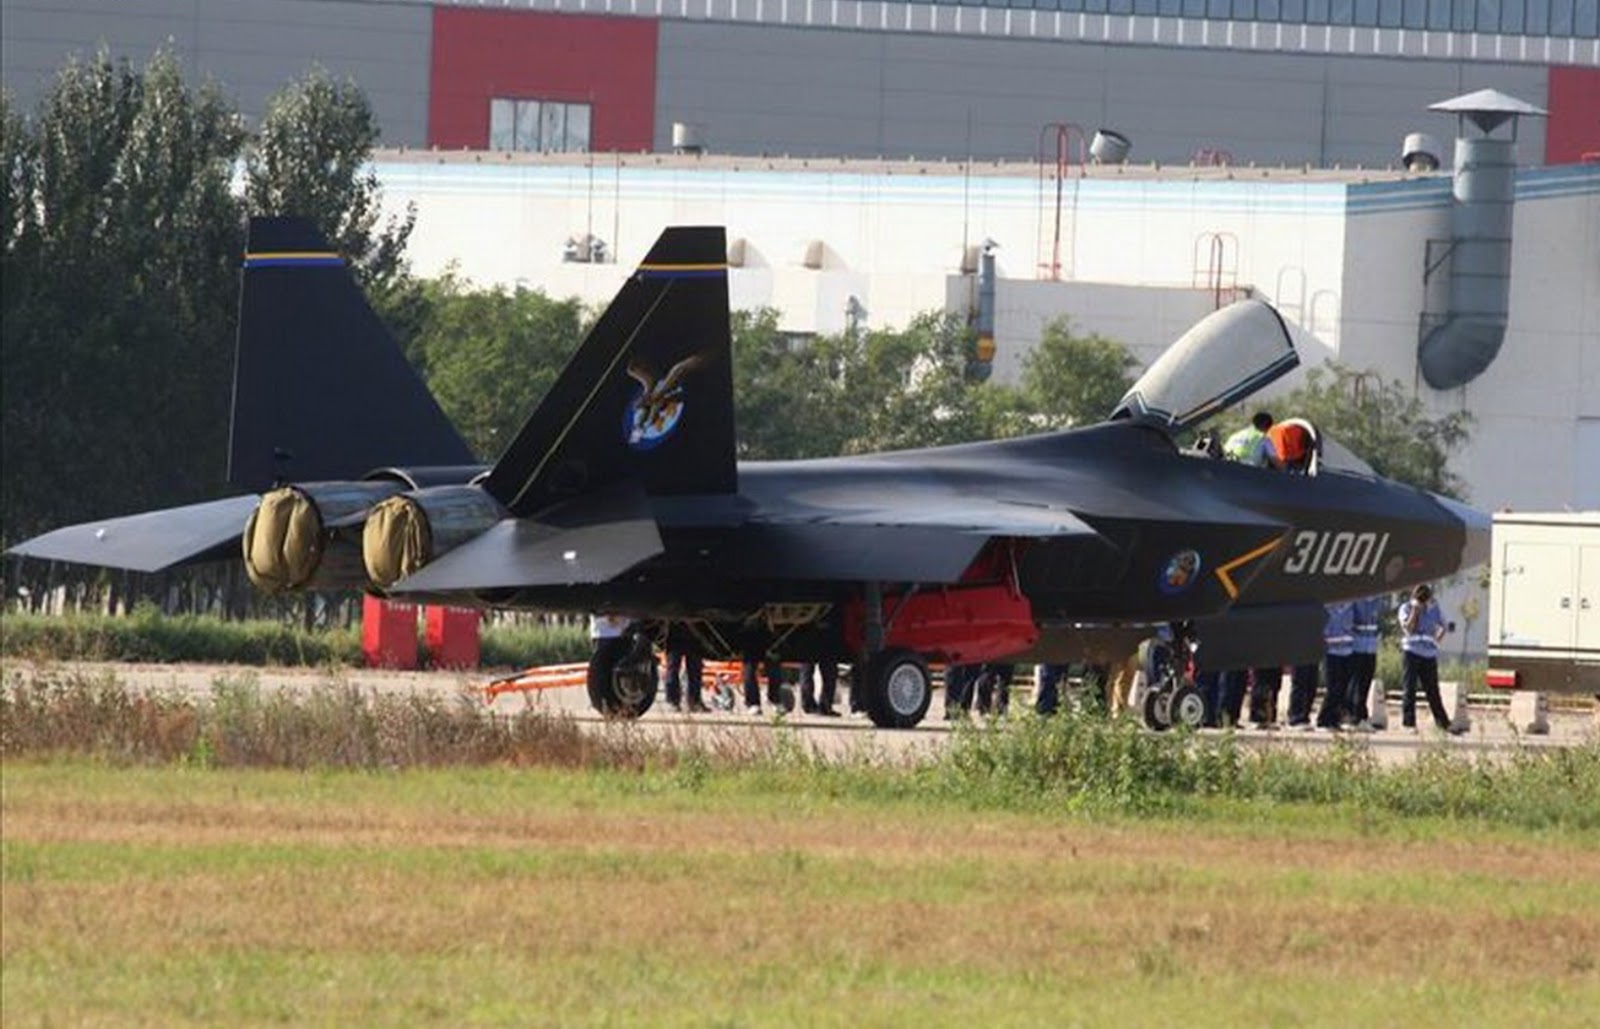 Shenyang J-31 - Página 4 New+J-31+60+17+18+212+25++fifth+generation+stealth+export+paf+pakistan++fighter+aircraft+prototype+People's+Liberation+Army+Air+Force++OPERATIONAL+pl-10+12+aam+bvr+missile+ls+pgm+gps+LS6